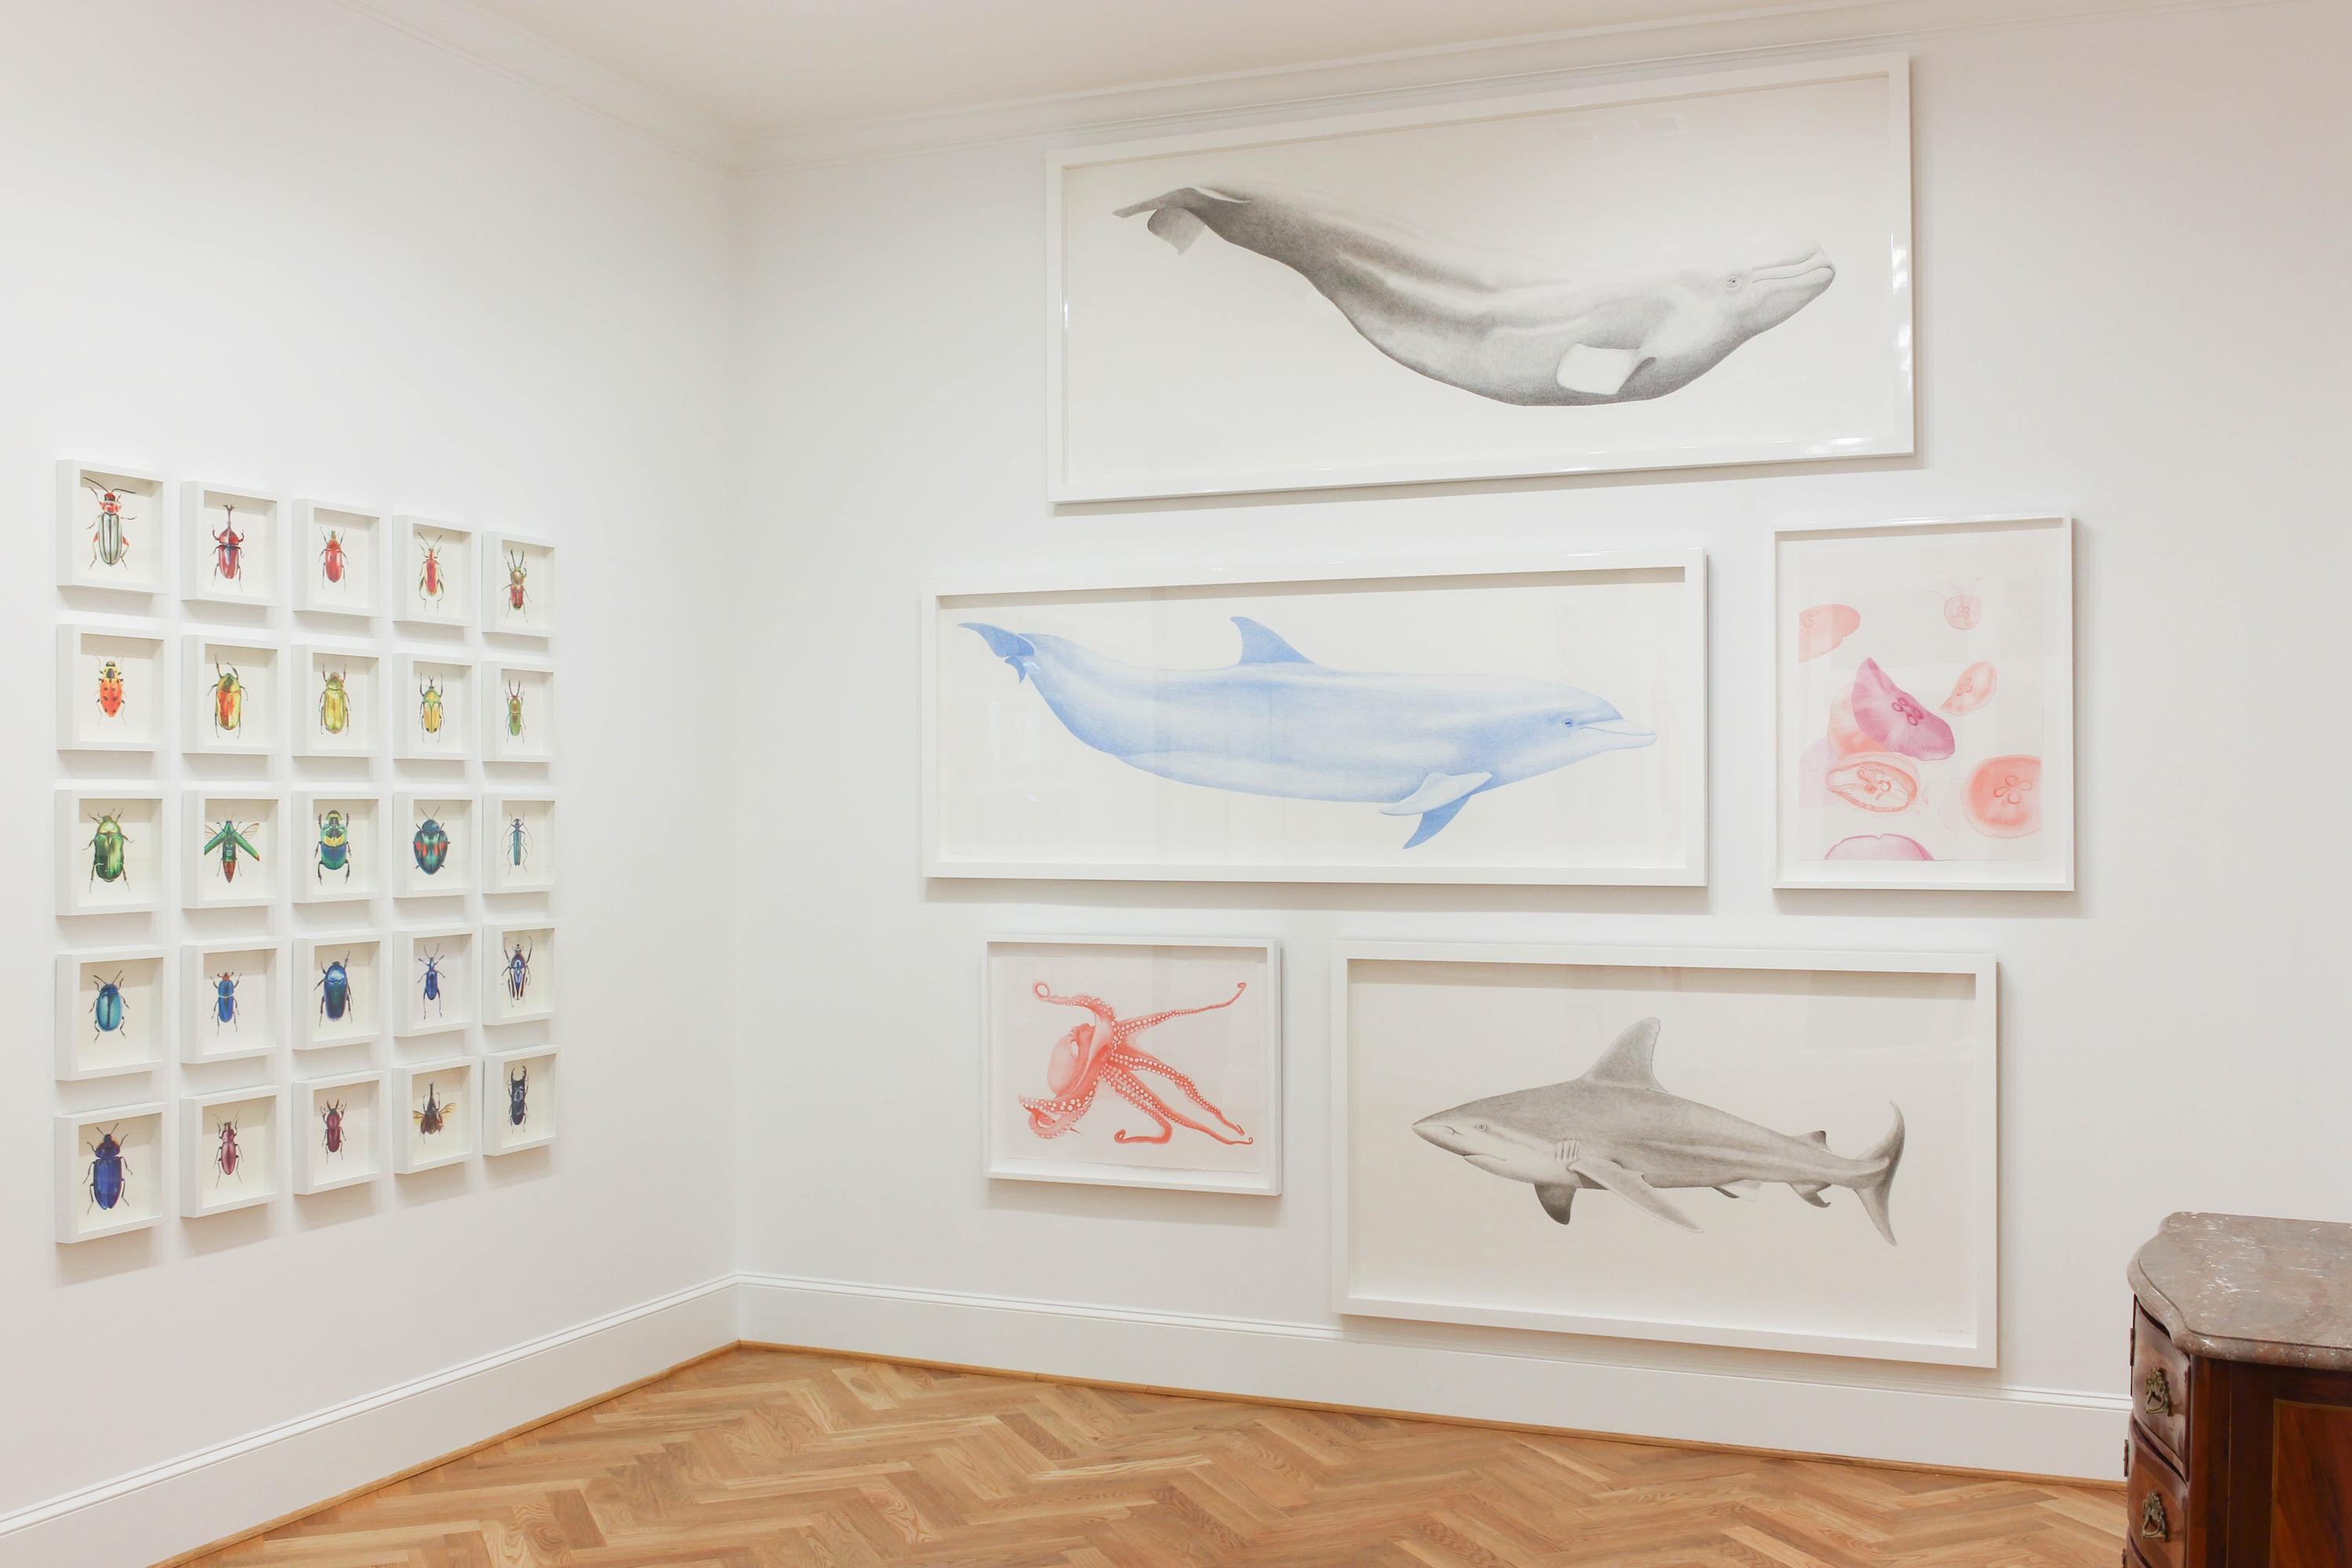 'Bottlenose Dolphin' - large-scale animal drawing - Chuck Close - Rembrandt - Contemporary Art by Hannah Hanlon